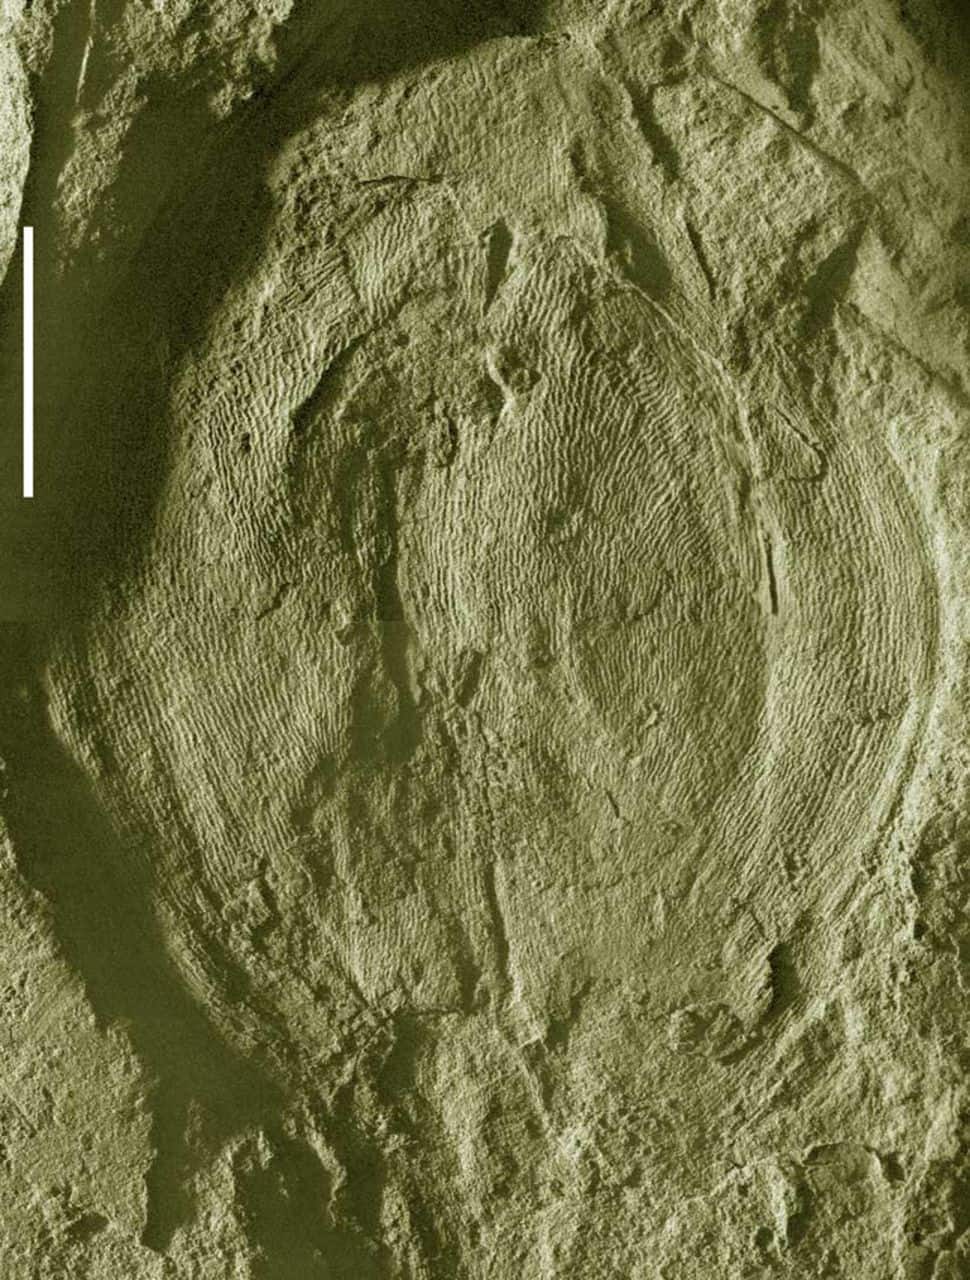 flower bud of Florigerminis jurassica gen. et sp. nov., showing tepals with sculptures. (Image credit: lyellcollection.org)